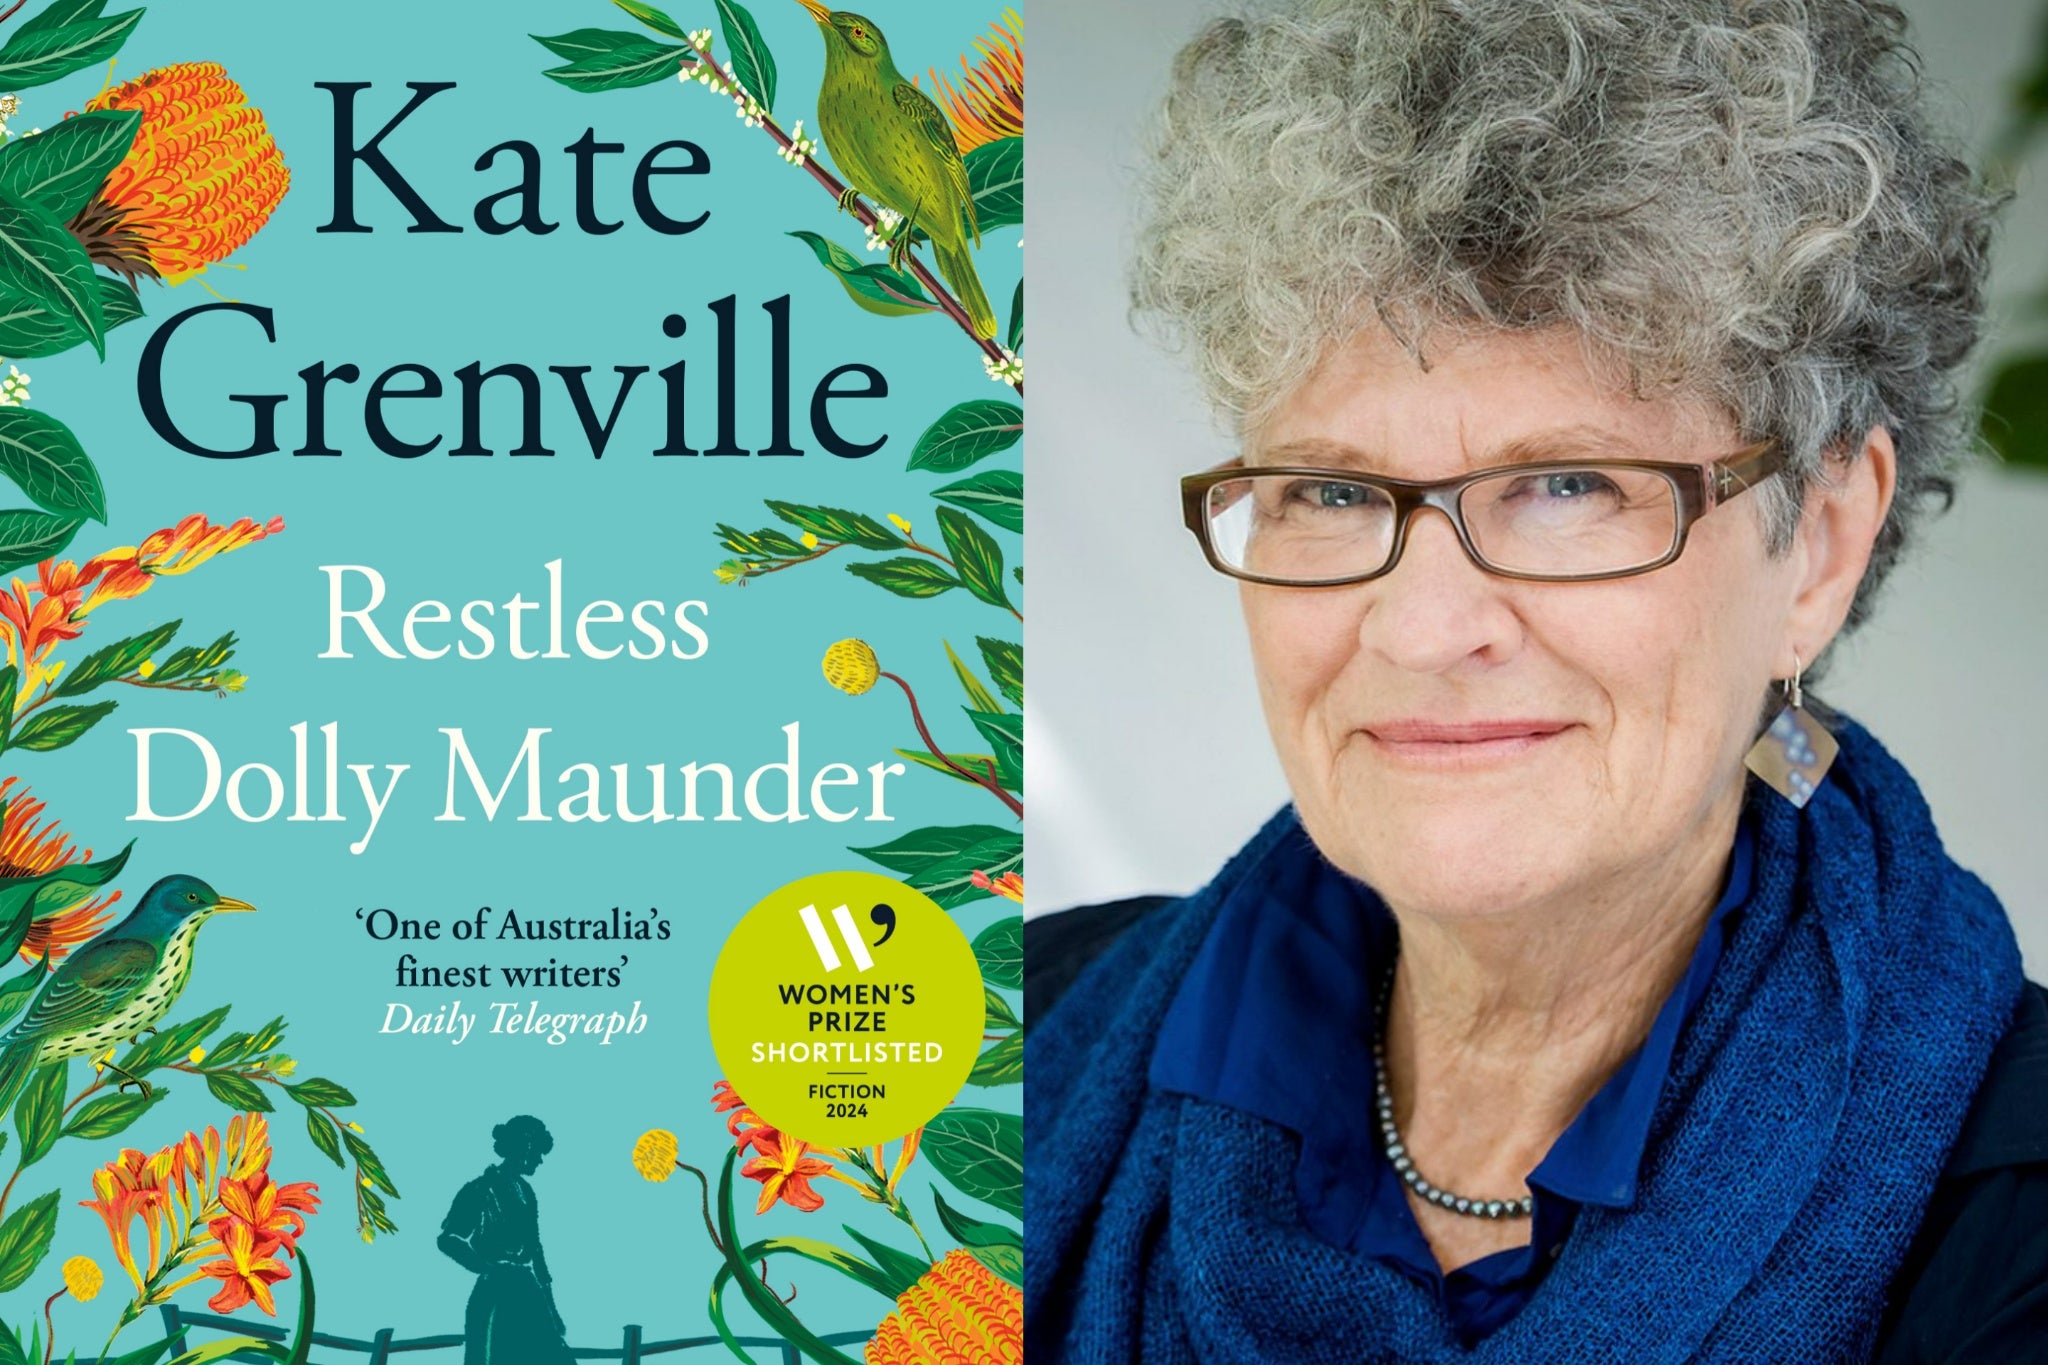 Restless Dolly Maunder and its author, Kate Grenville